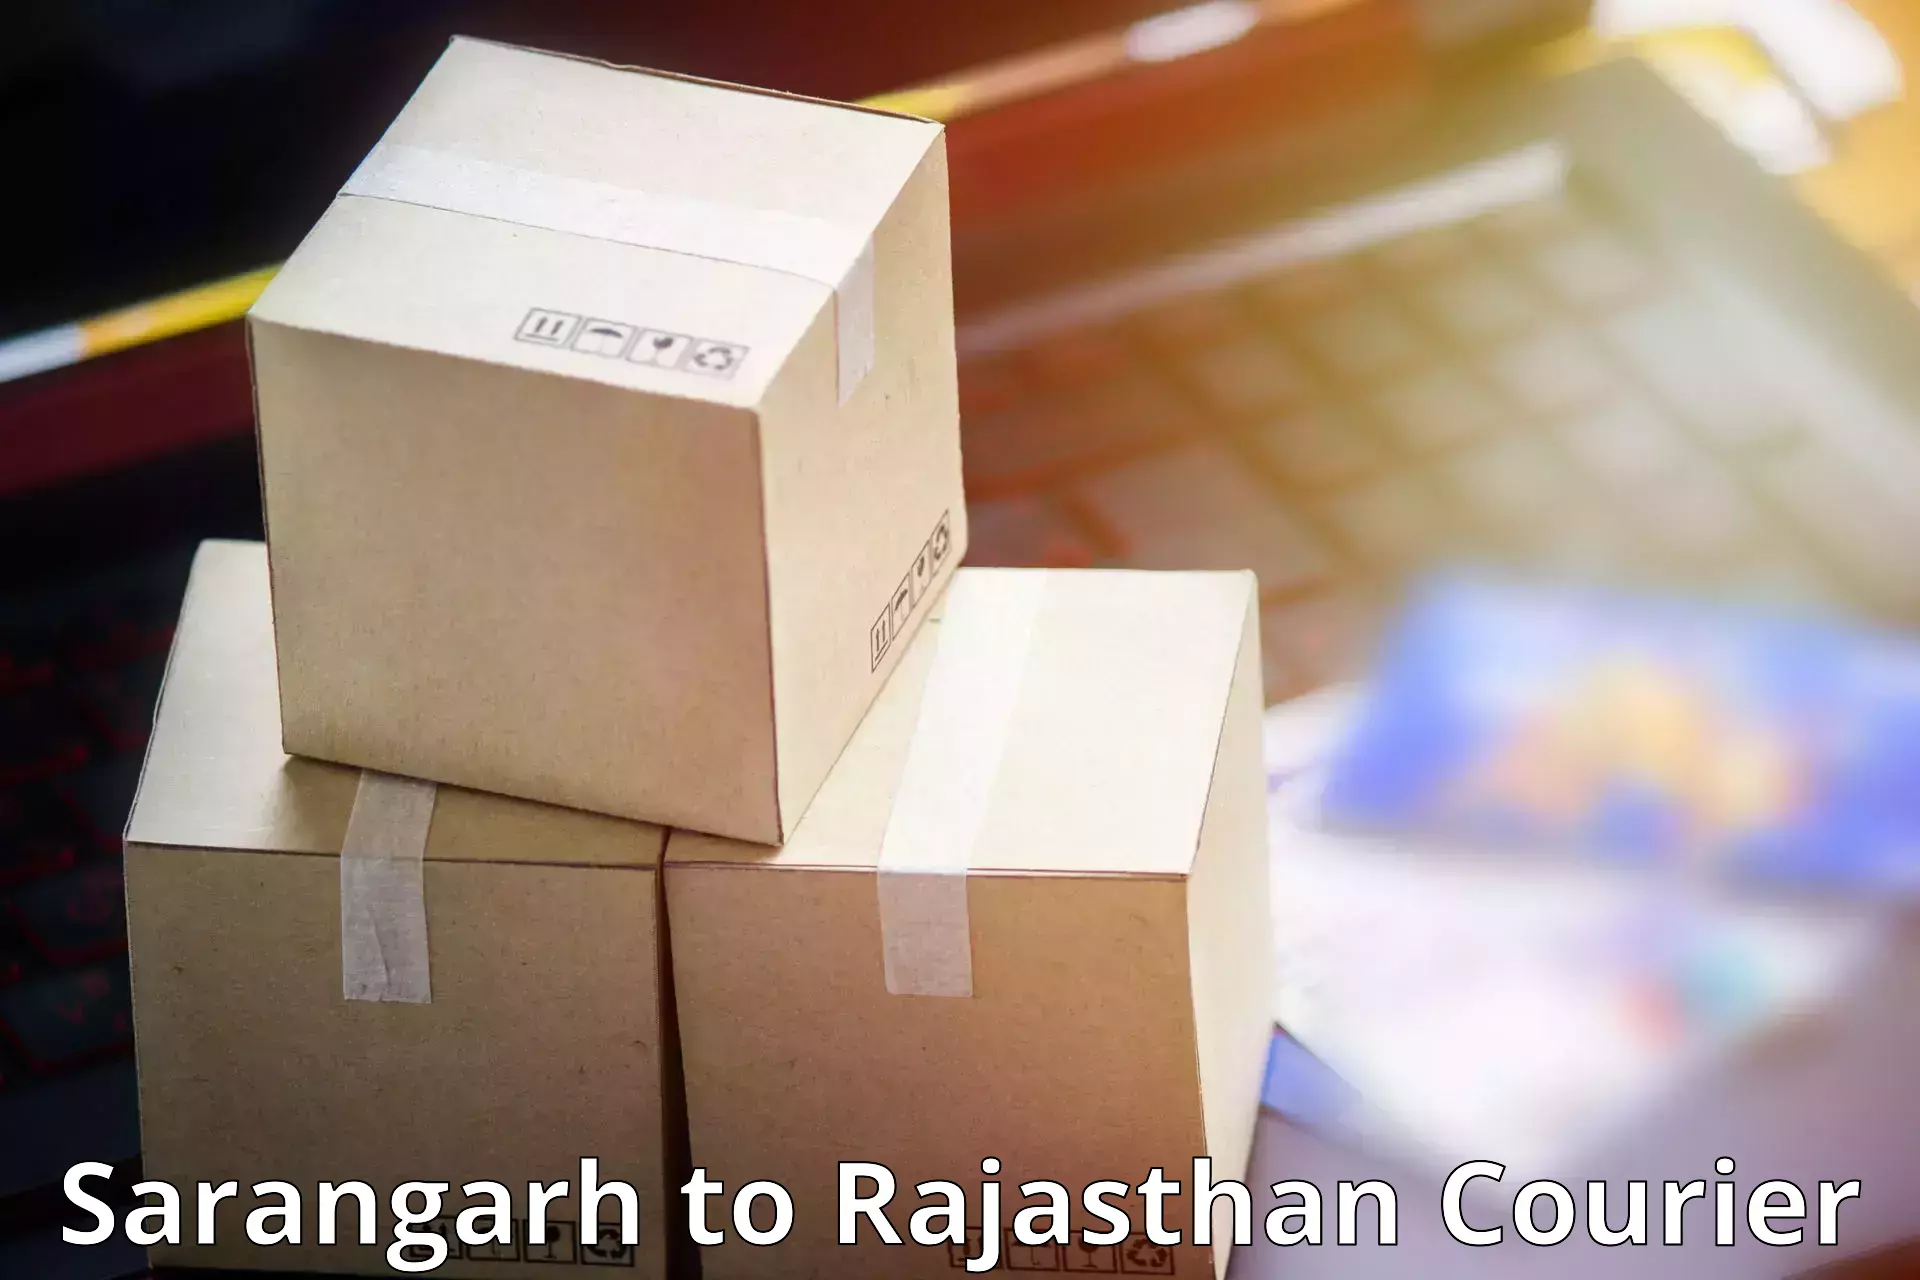 Custom courier packages Sarangarh to Jaipur